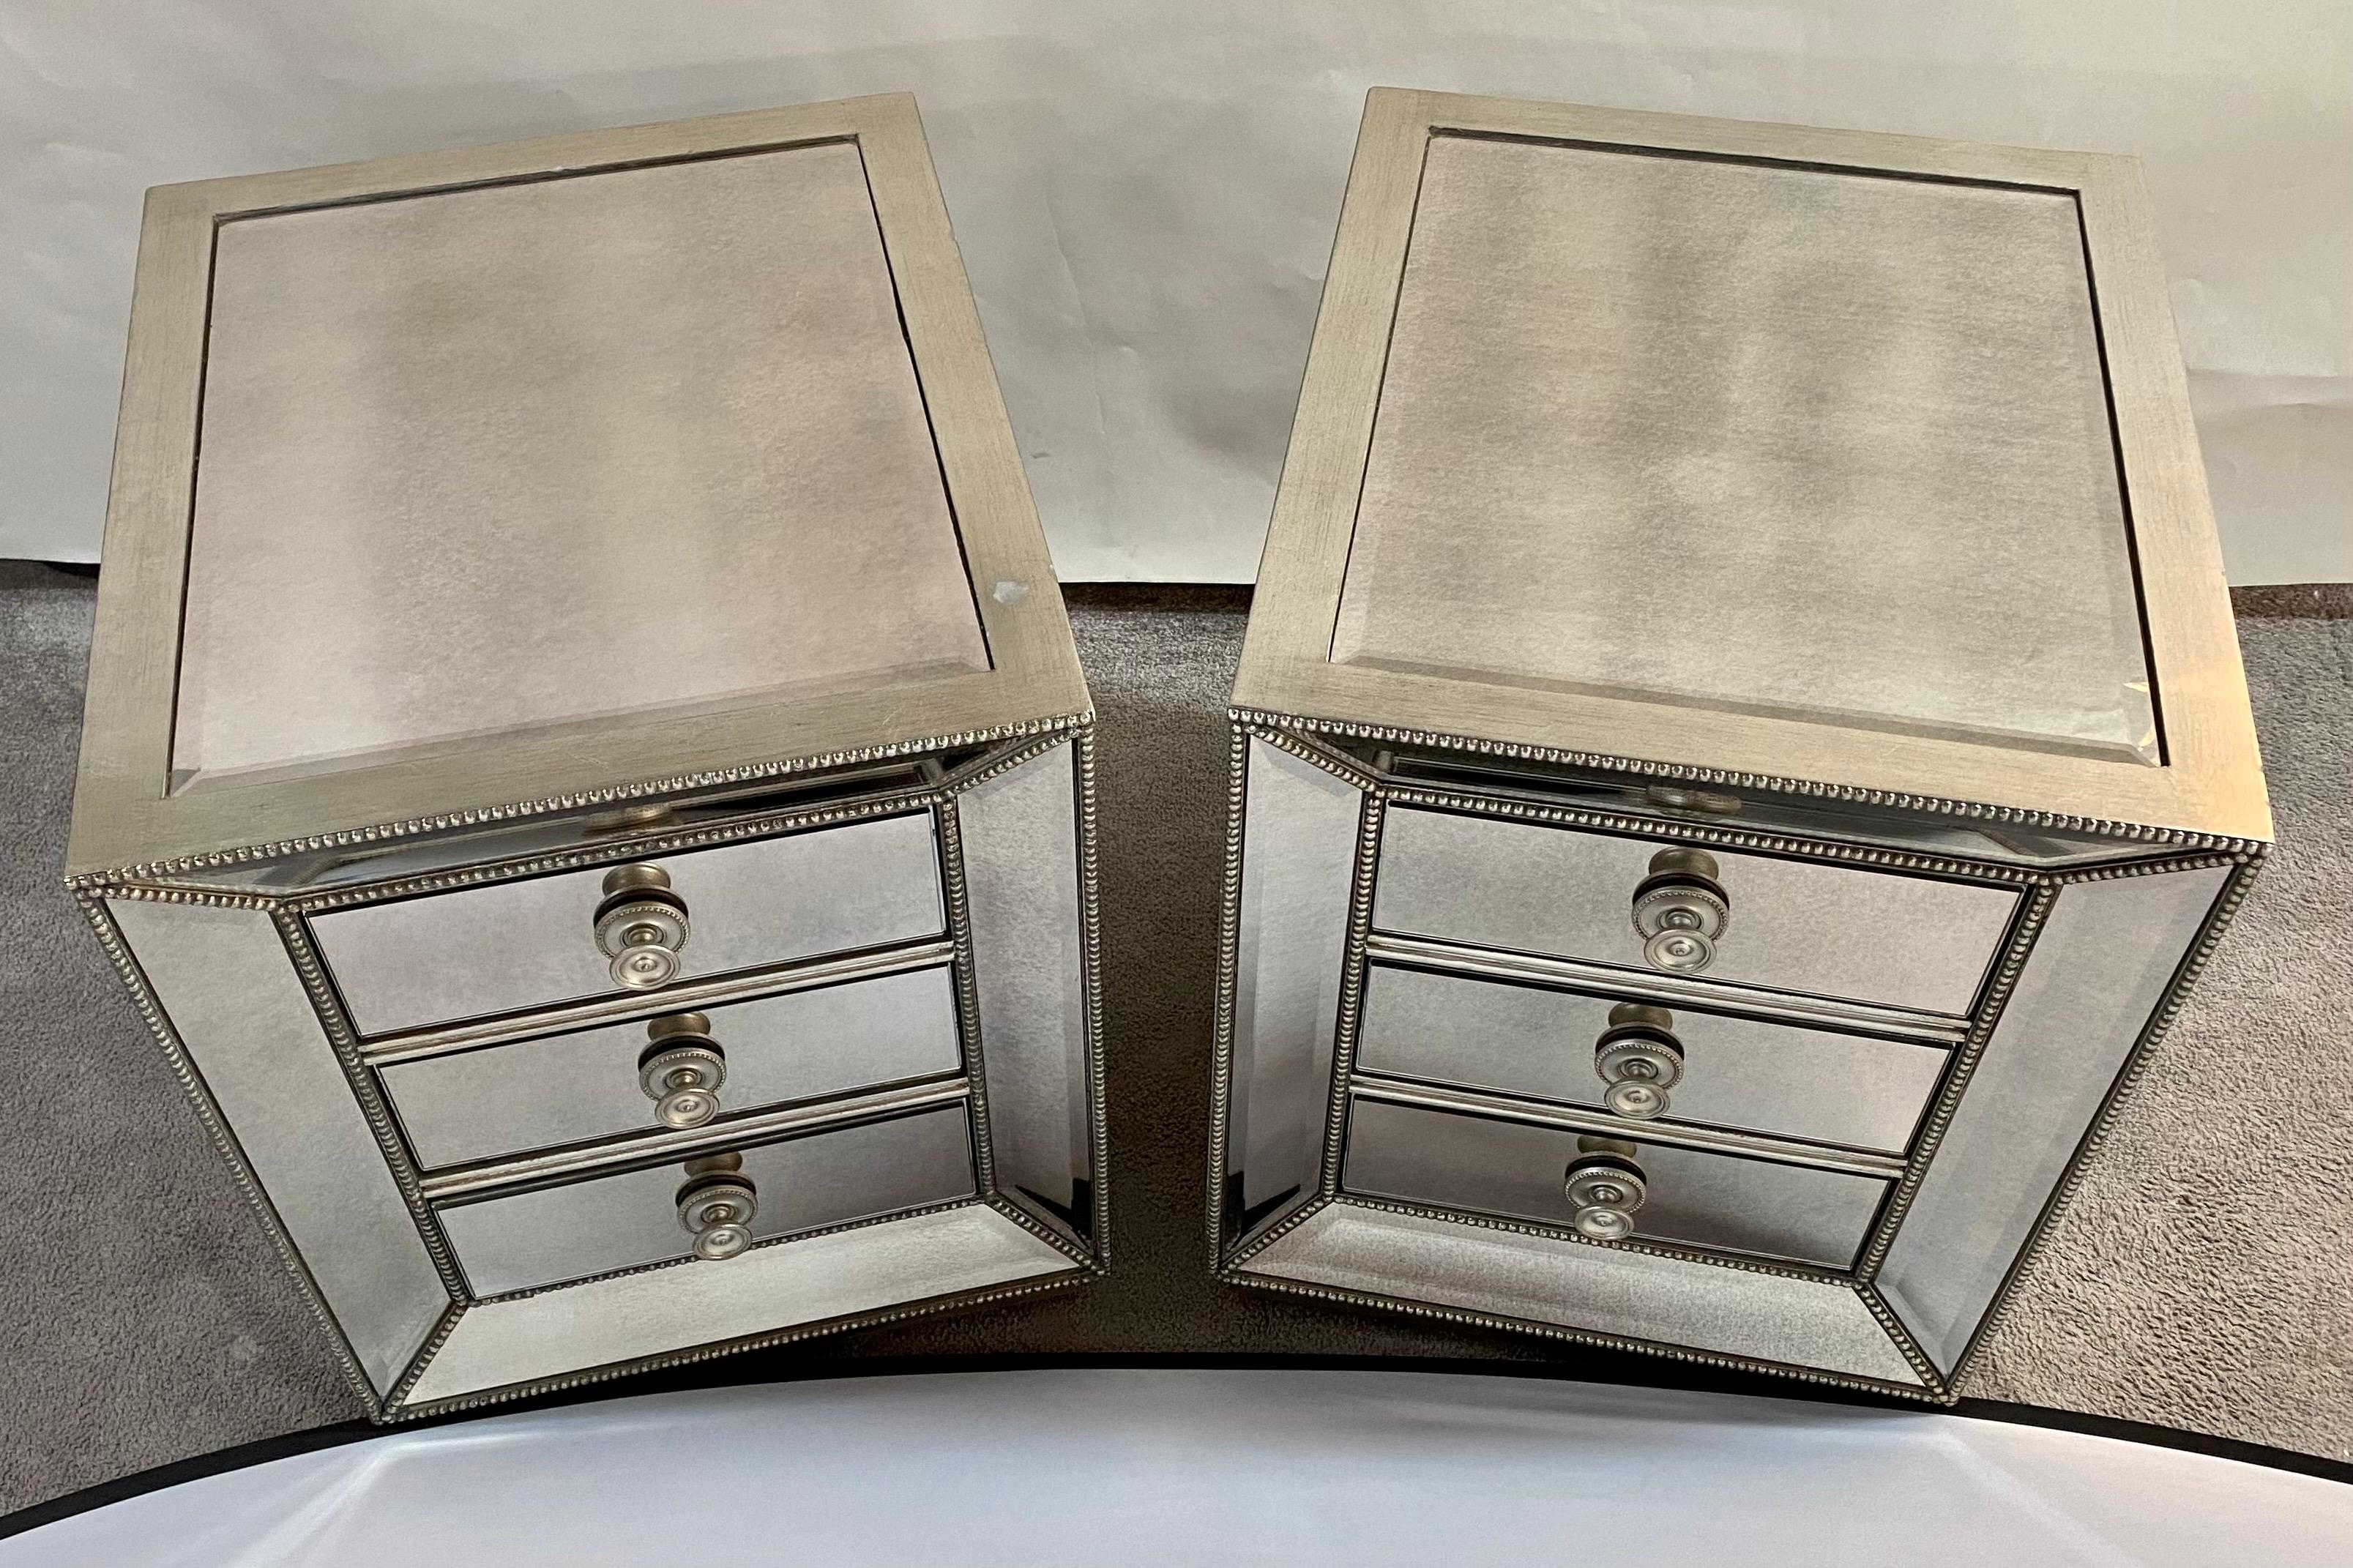 An exquisite pair of nightstands that capture the essence of the directoire style aesthetics. These study and well built nightstands, showcasing a trifecta of functional drawers, stand as an exquisite fusion of form and function, where style meets